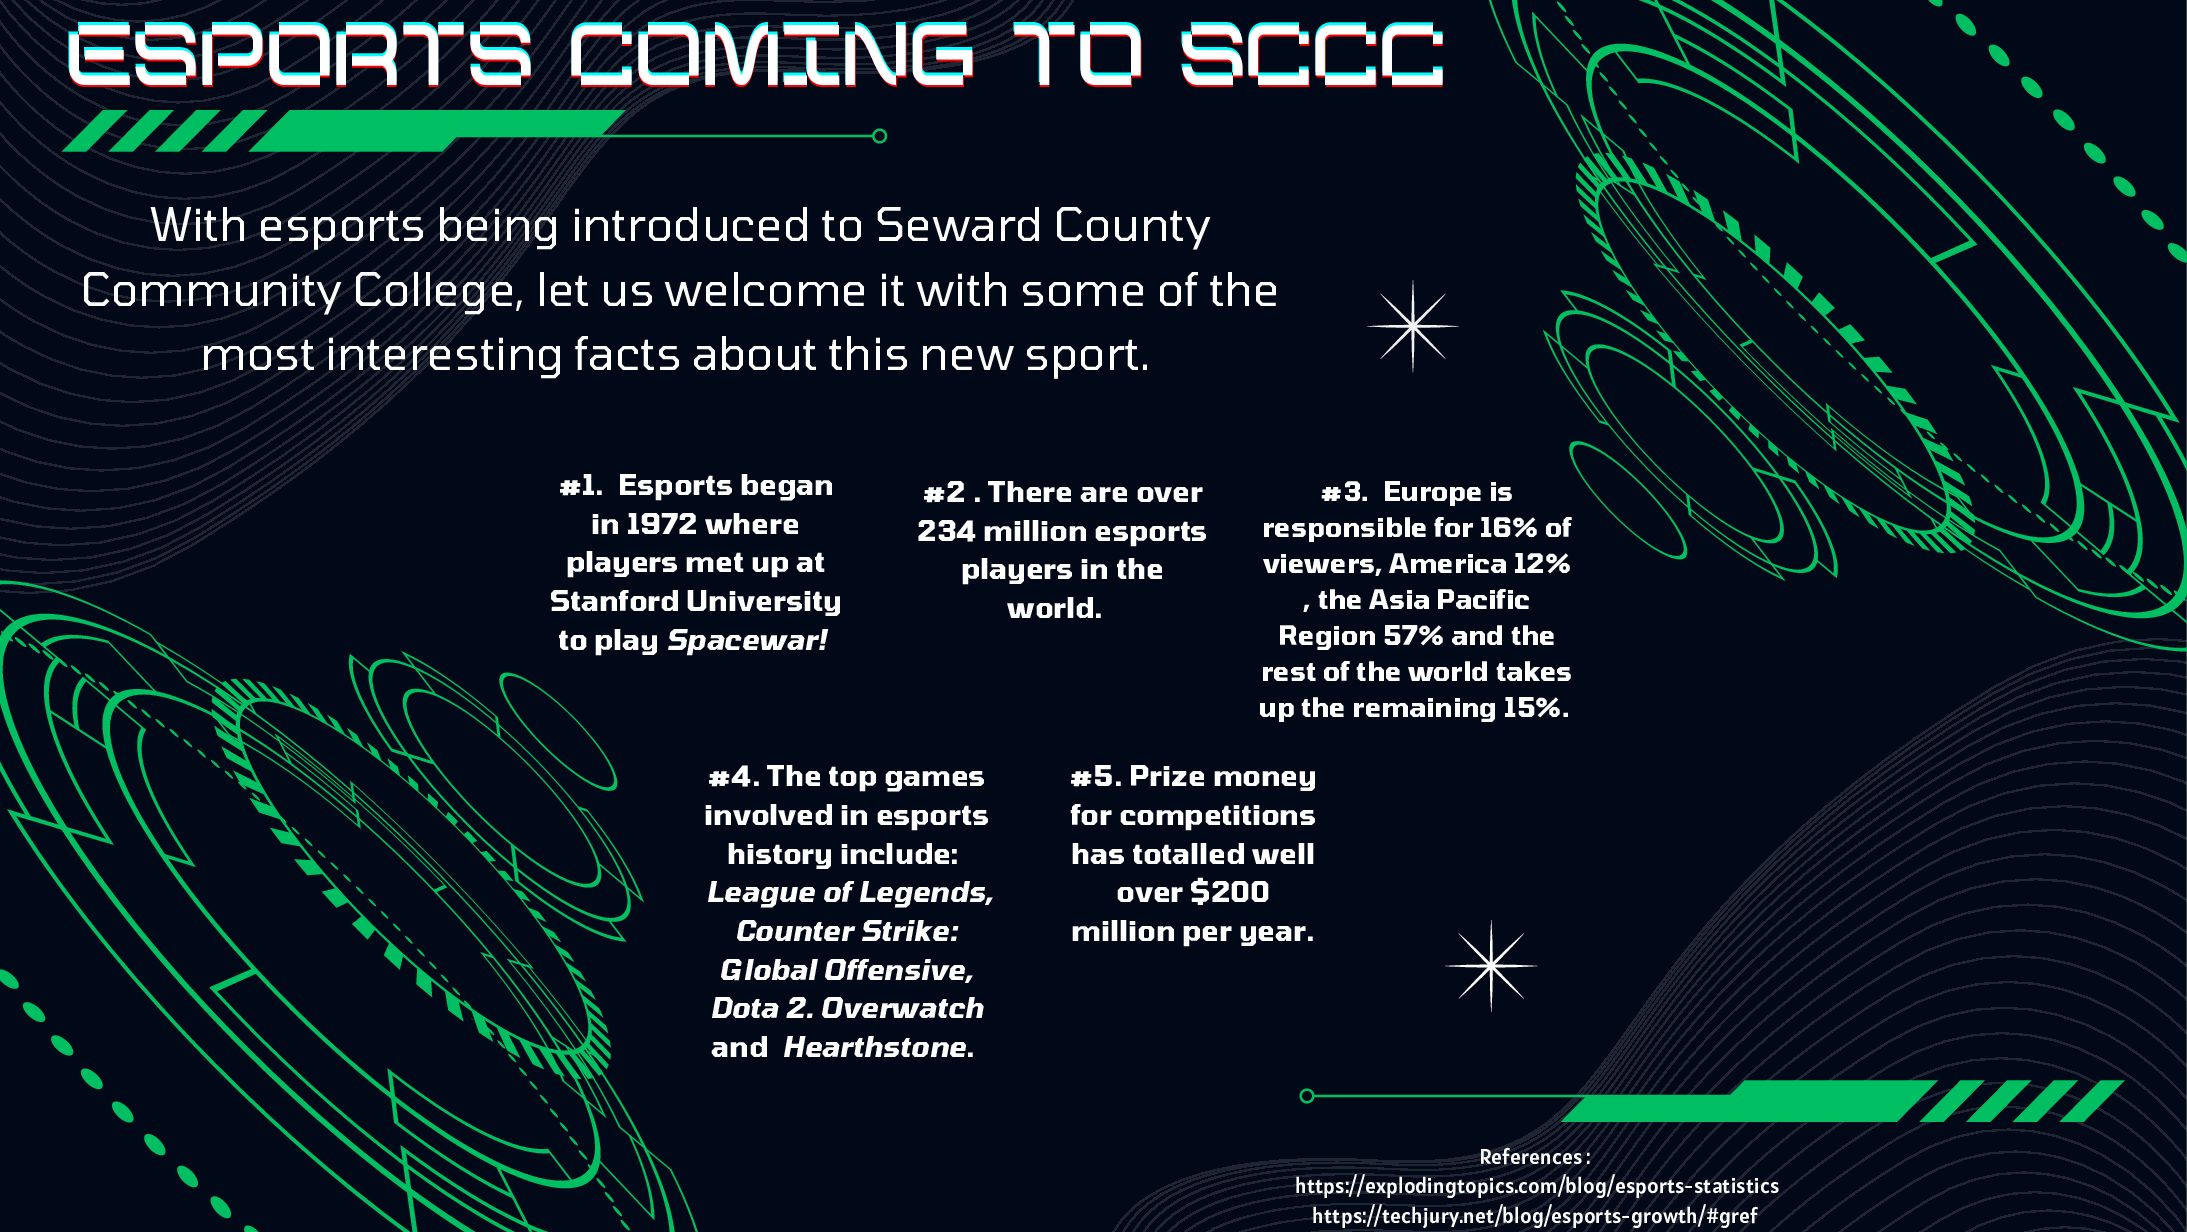 Coming soon to Seward County Community College is esports, a type of sporting event where video games are played competitively. The new sport will start in the fall of 2023 with new head coach Eric D. Volden.